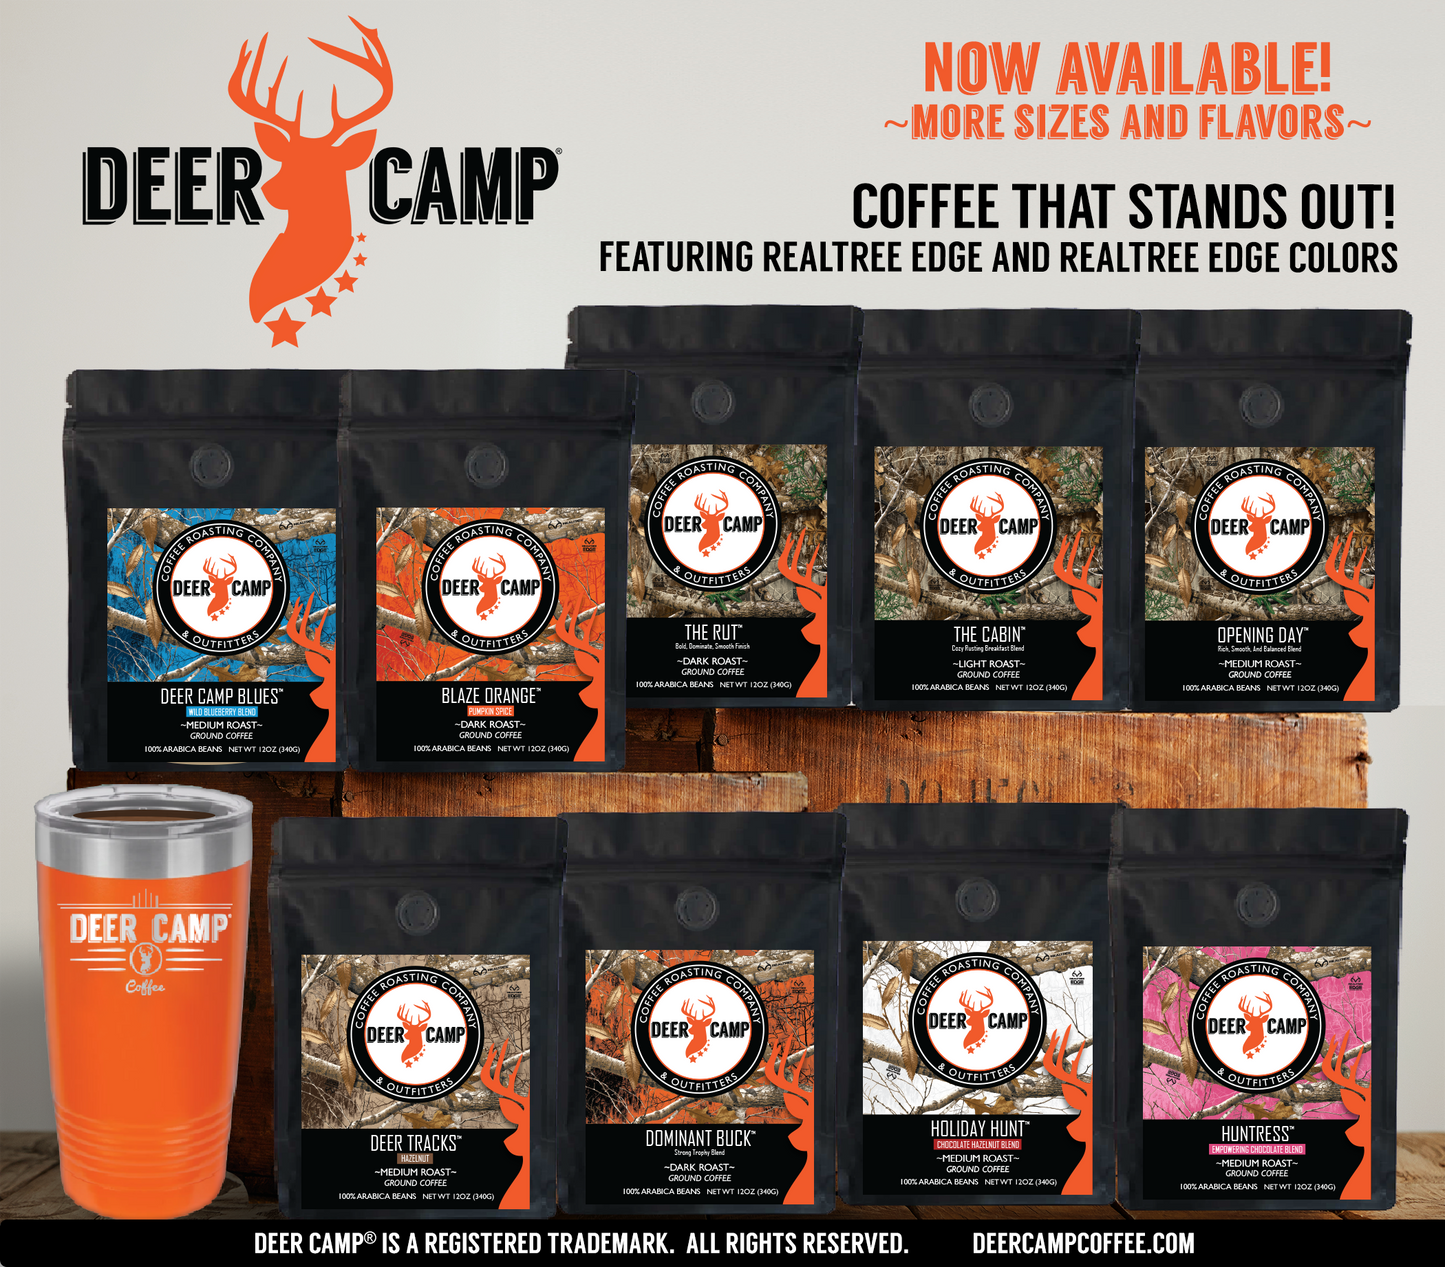 DEER CAMP® Huntress™ Chocolate Flavor  Featuring REALTREE